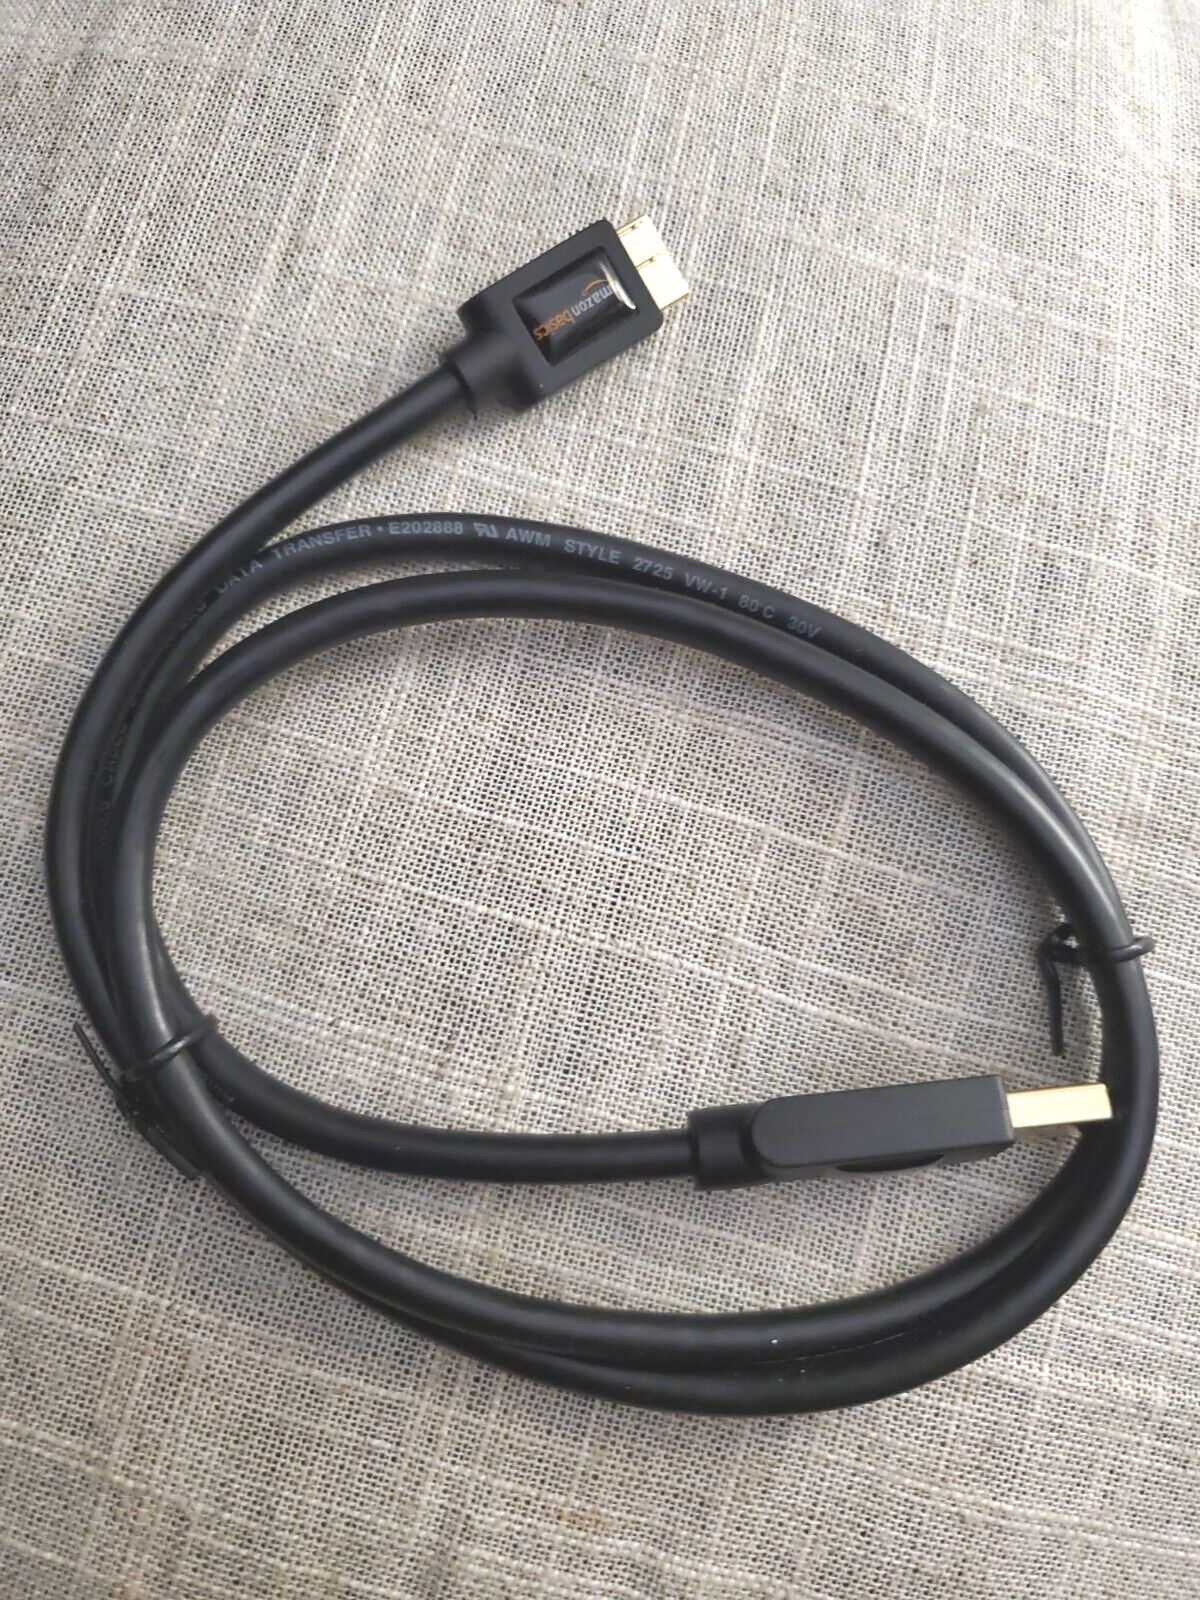 NEW AmazonBasics USB 3.0 Charger Cable - A-Male to Micro-B - 3 Feet (0.9 Meters)